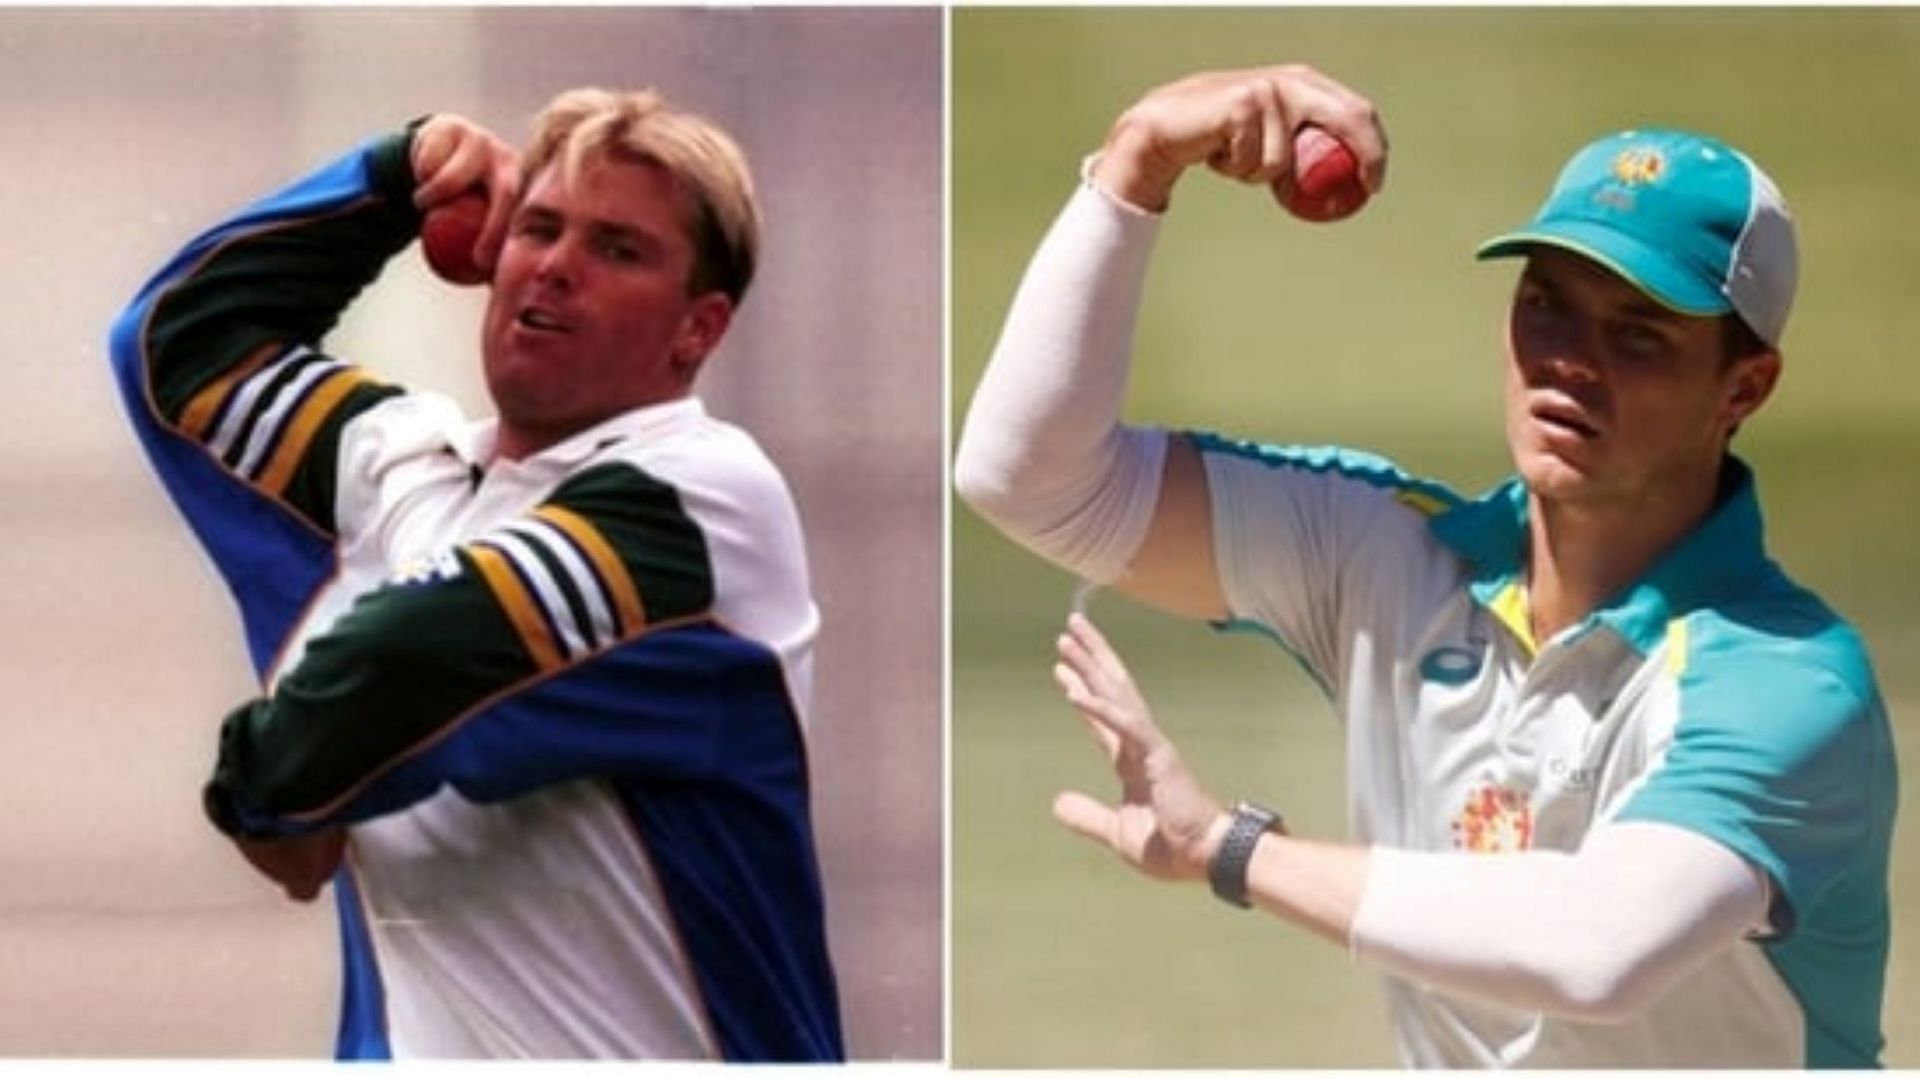 Australia have struggled to produce a quality wrist spinner since Shane Warne